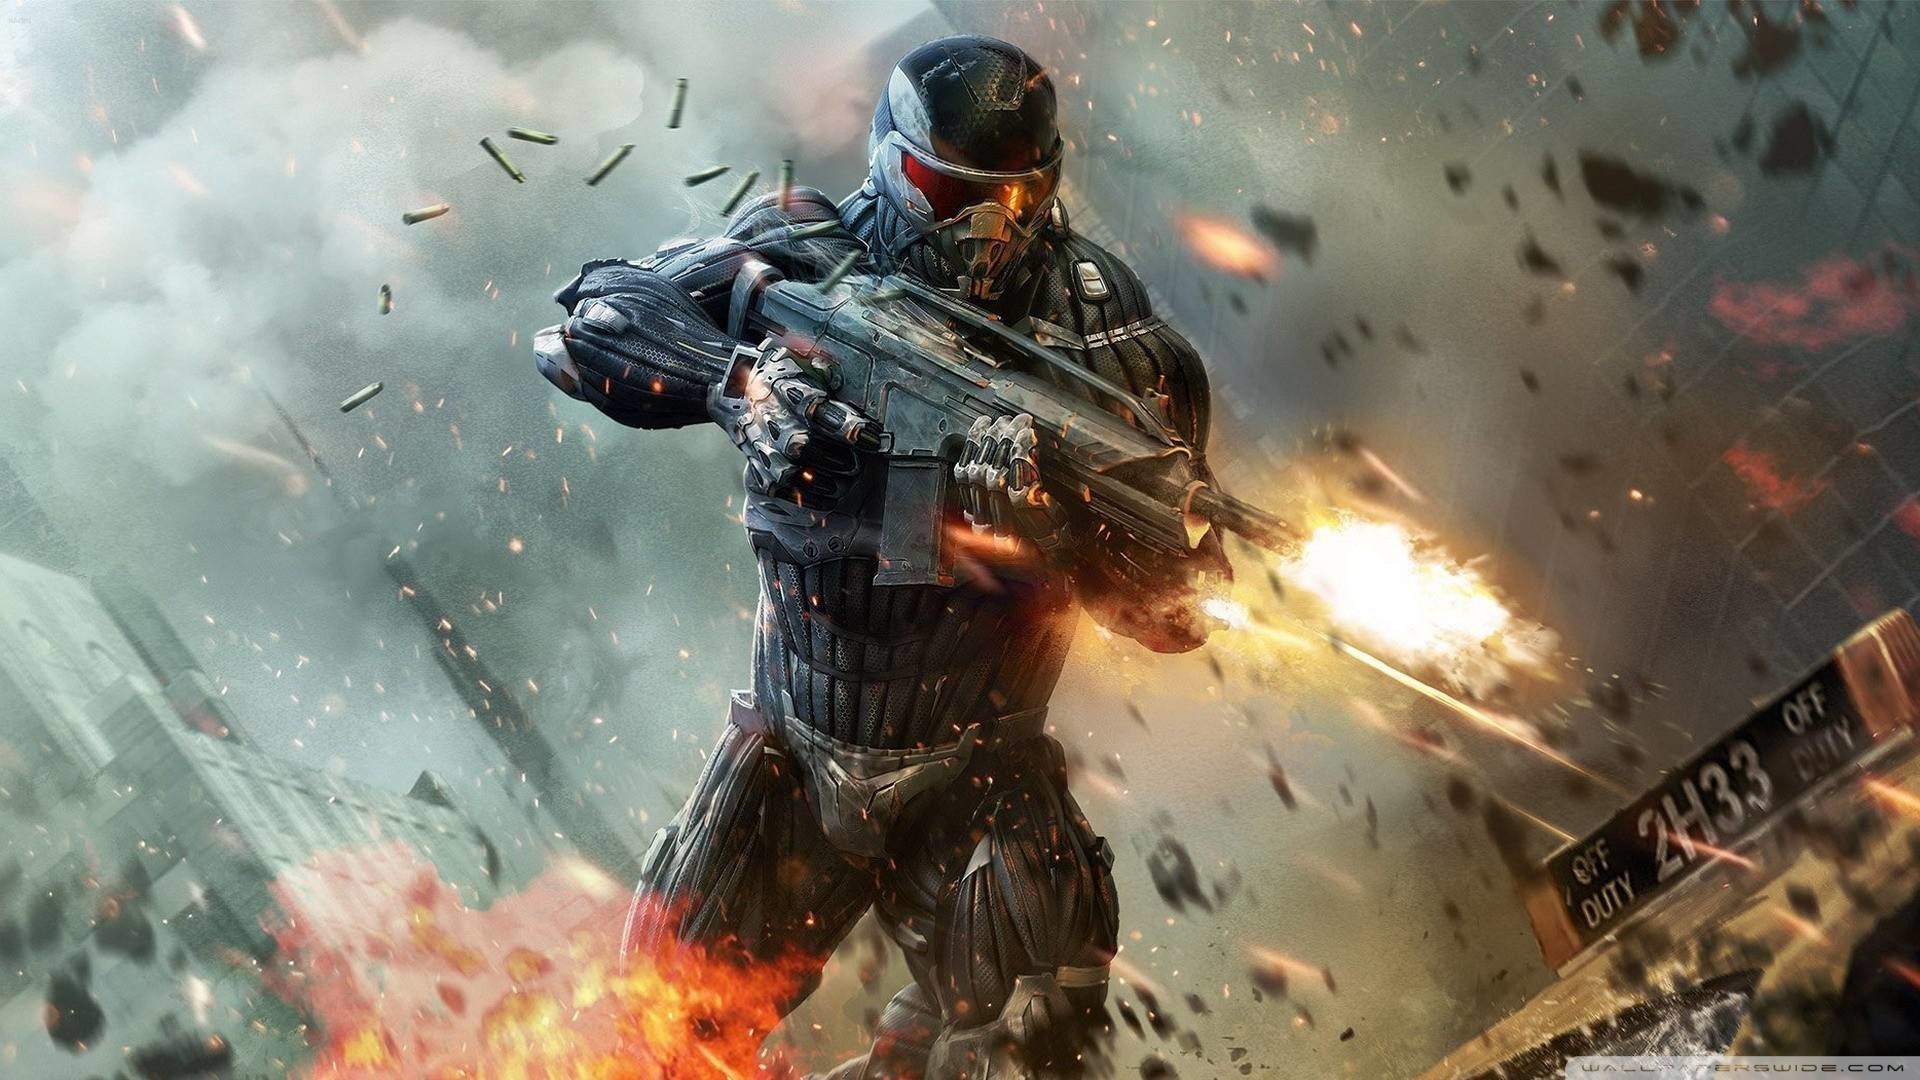 1920x1080  HD Wallpapers Widescreen 1080P 3D | View Full Size | More crysis  2 wallpaper full